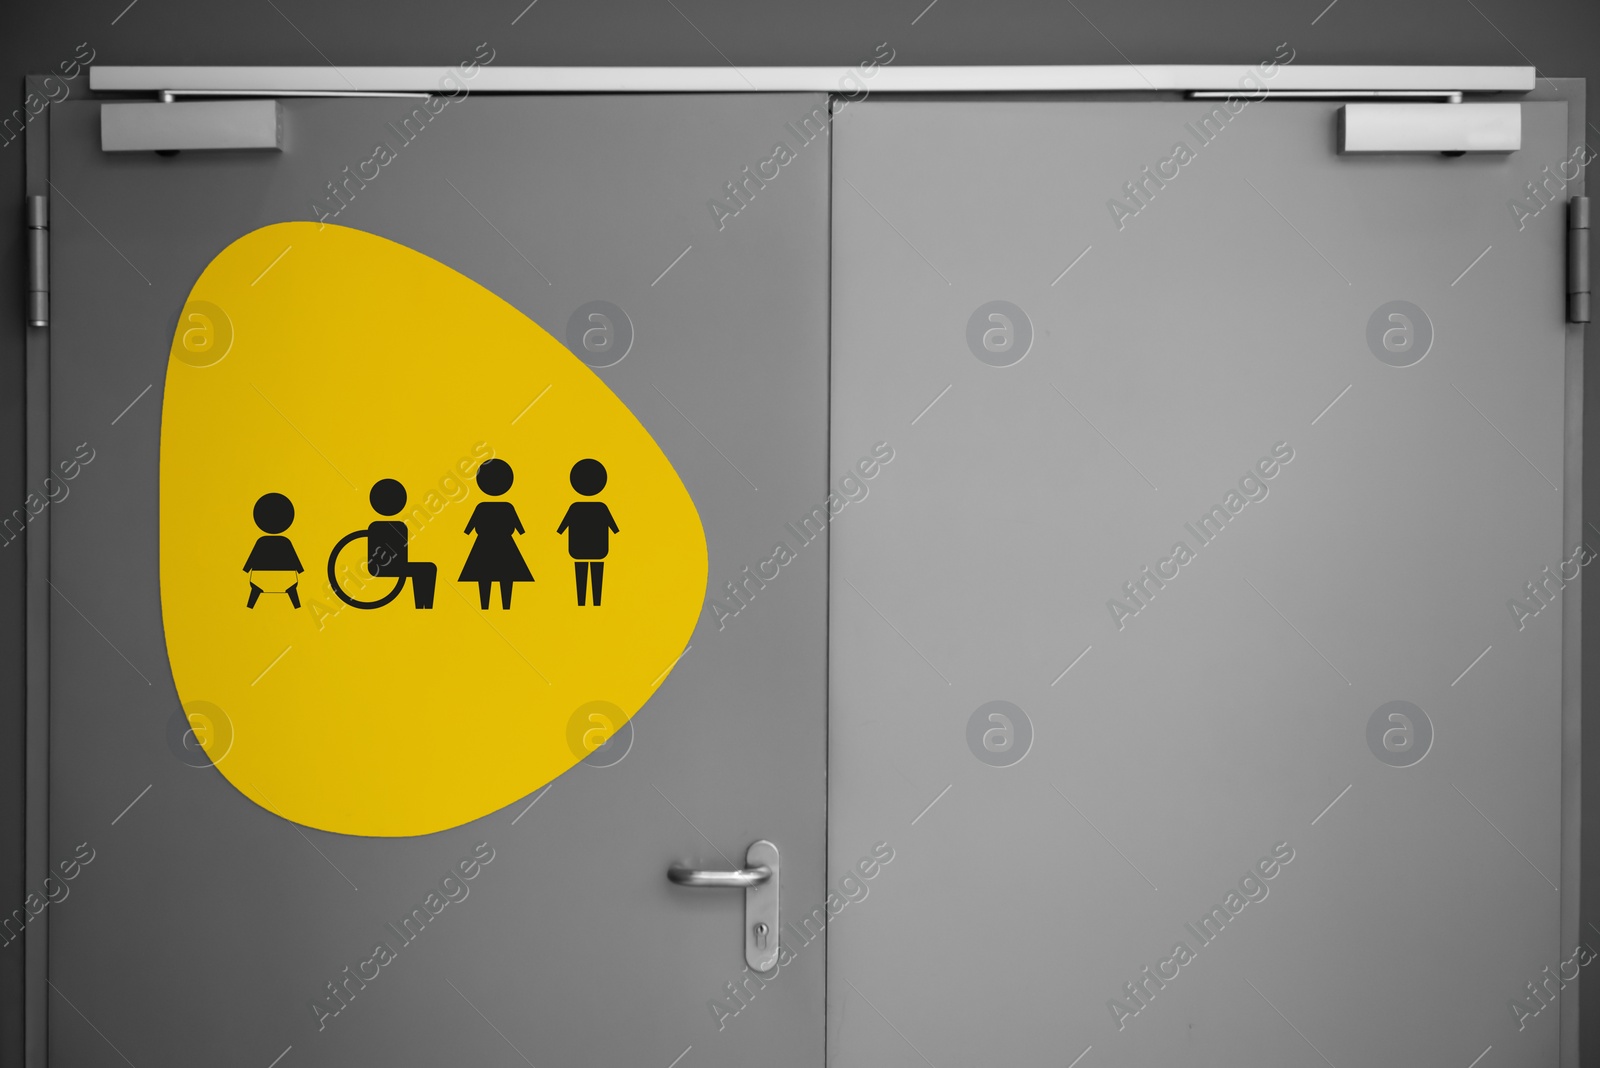 Image of Public toilet sign with symbols on door